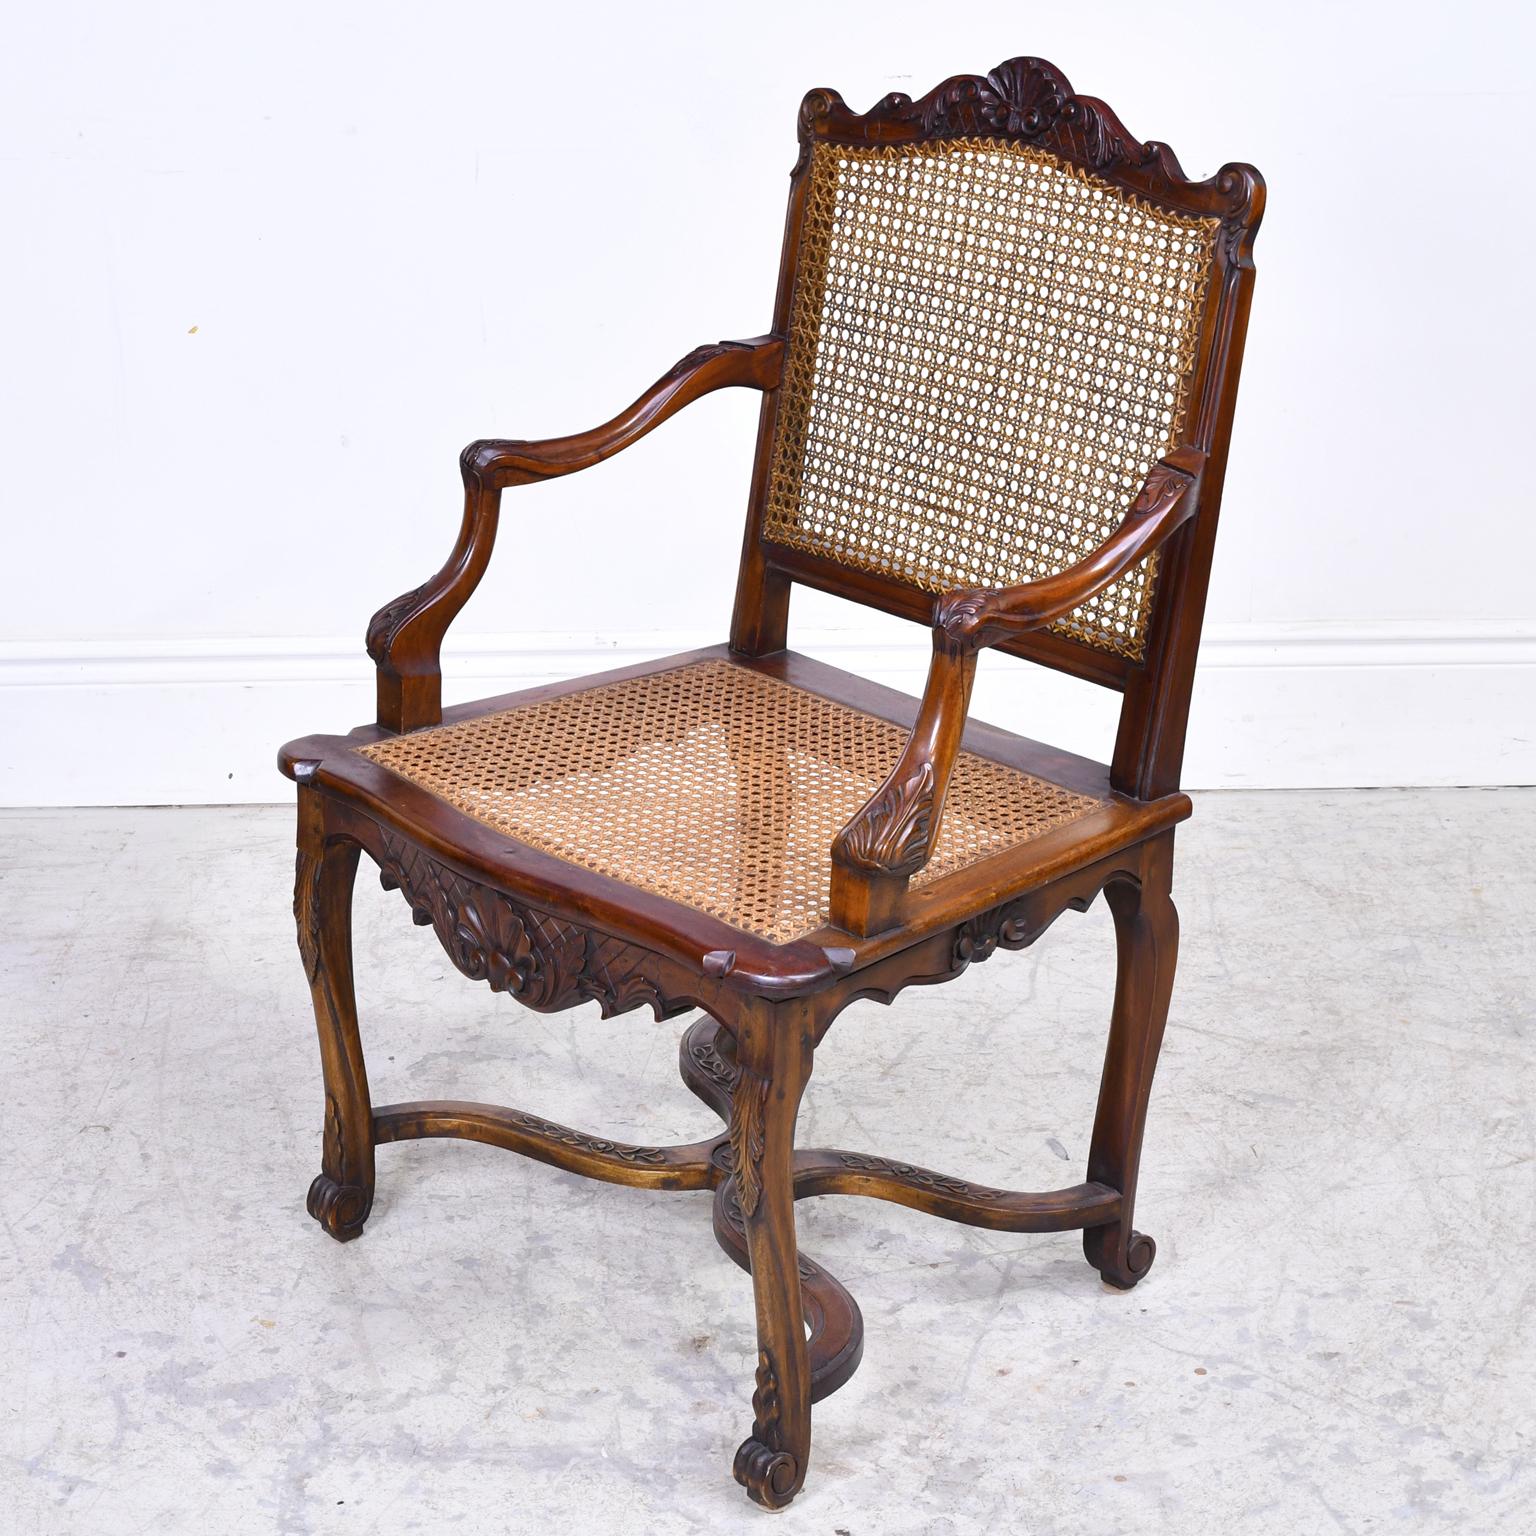 French Set of 10 LXVI Chairs with Pair of Arms and 8 Side Chairs, Caned Seat and Back